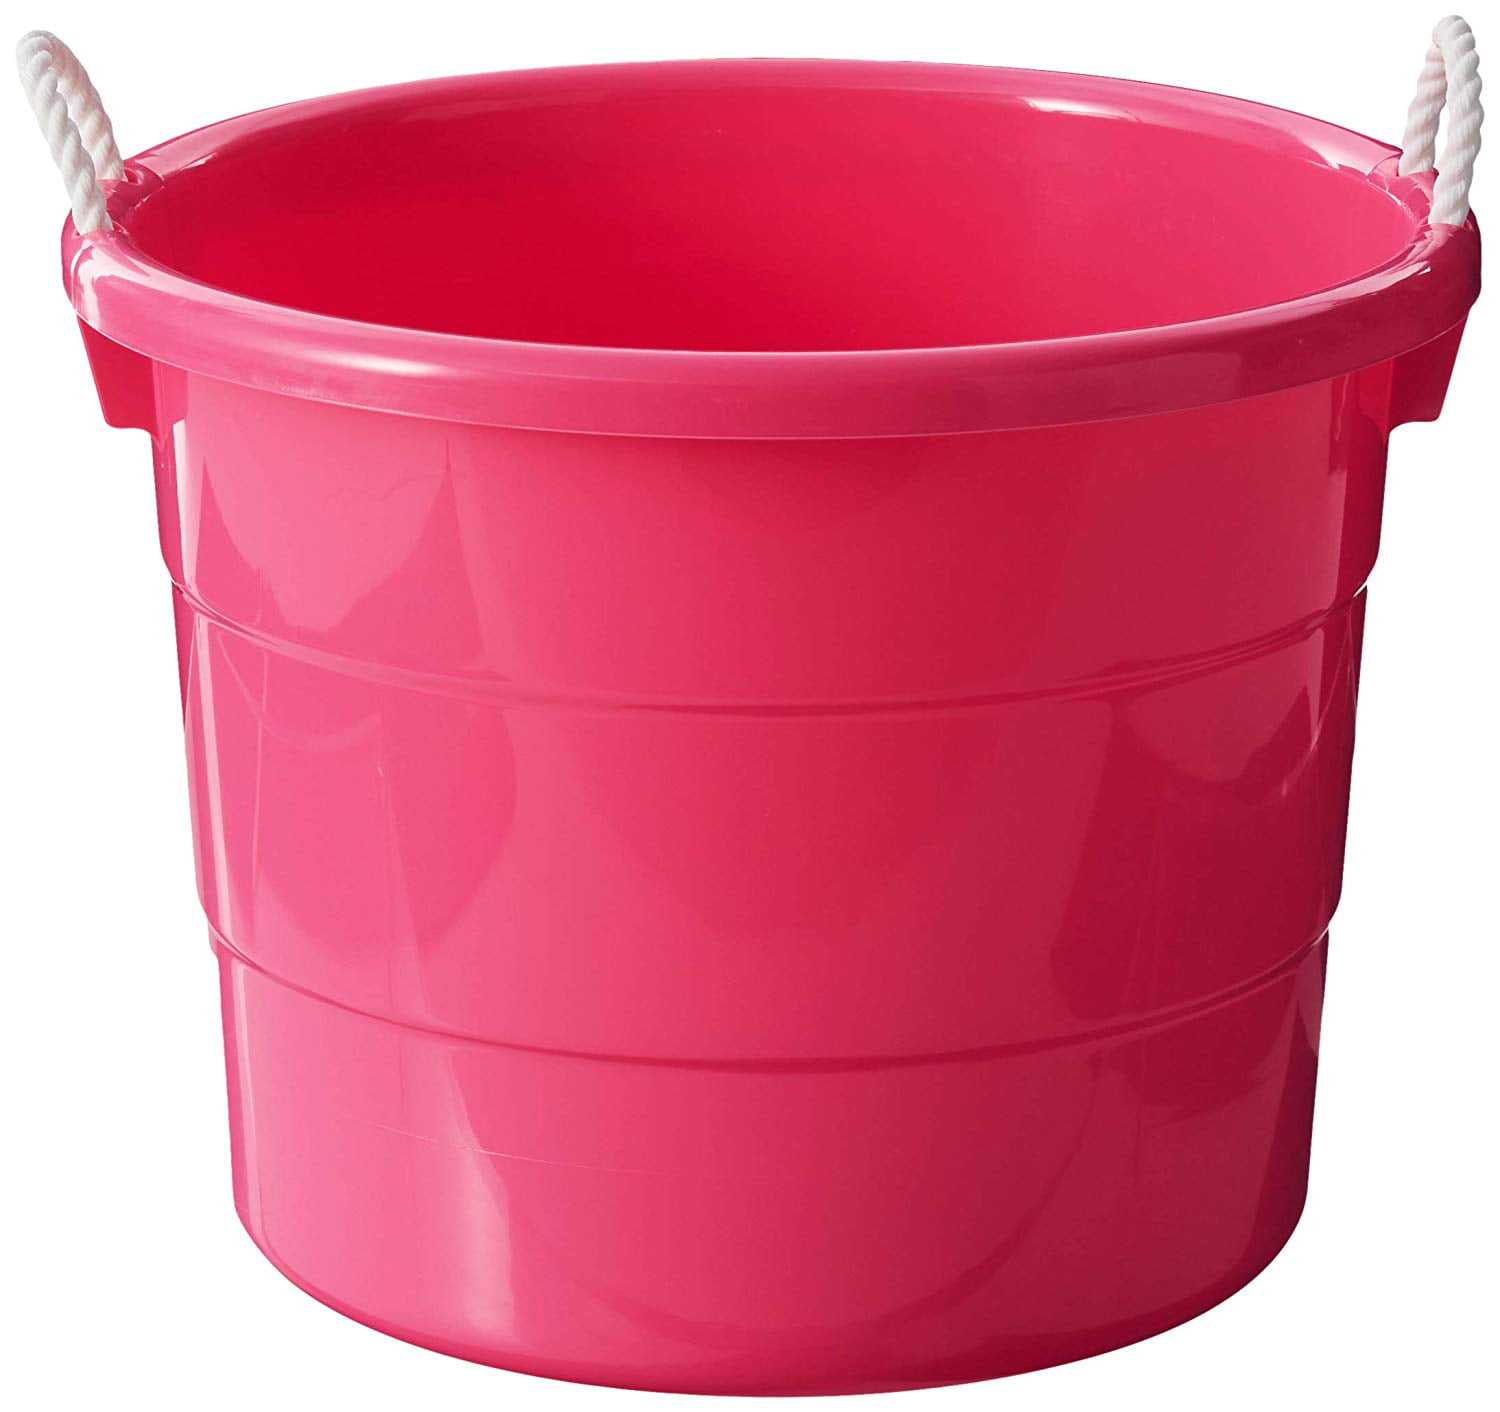 Homz Plastic Utility Tub with Rope Handles, 18 Gallon, Pink, Set of 4 - Wal...